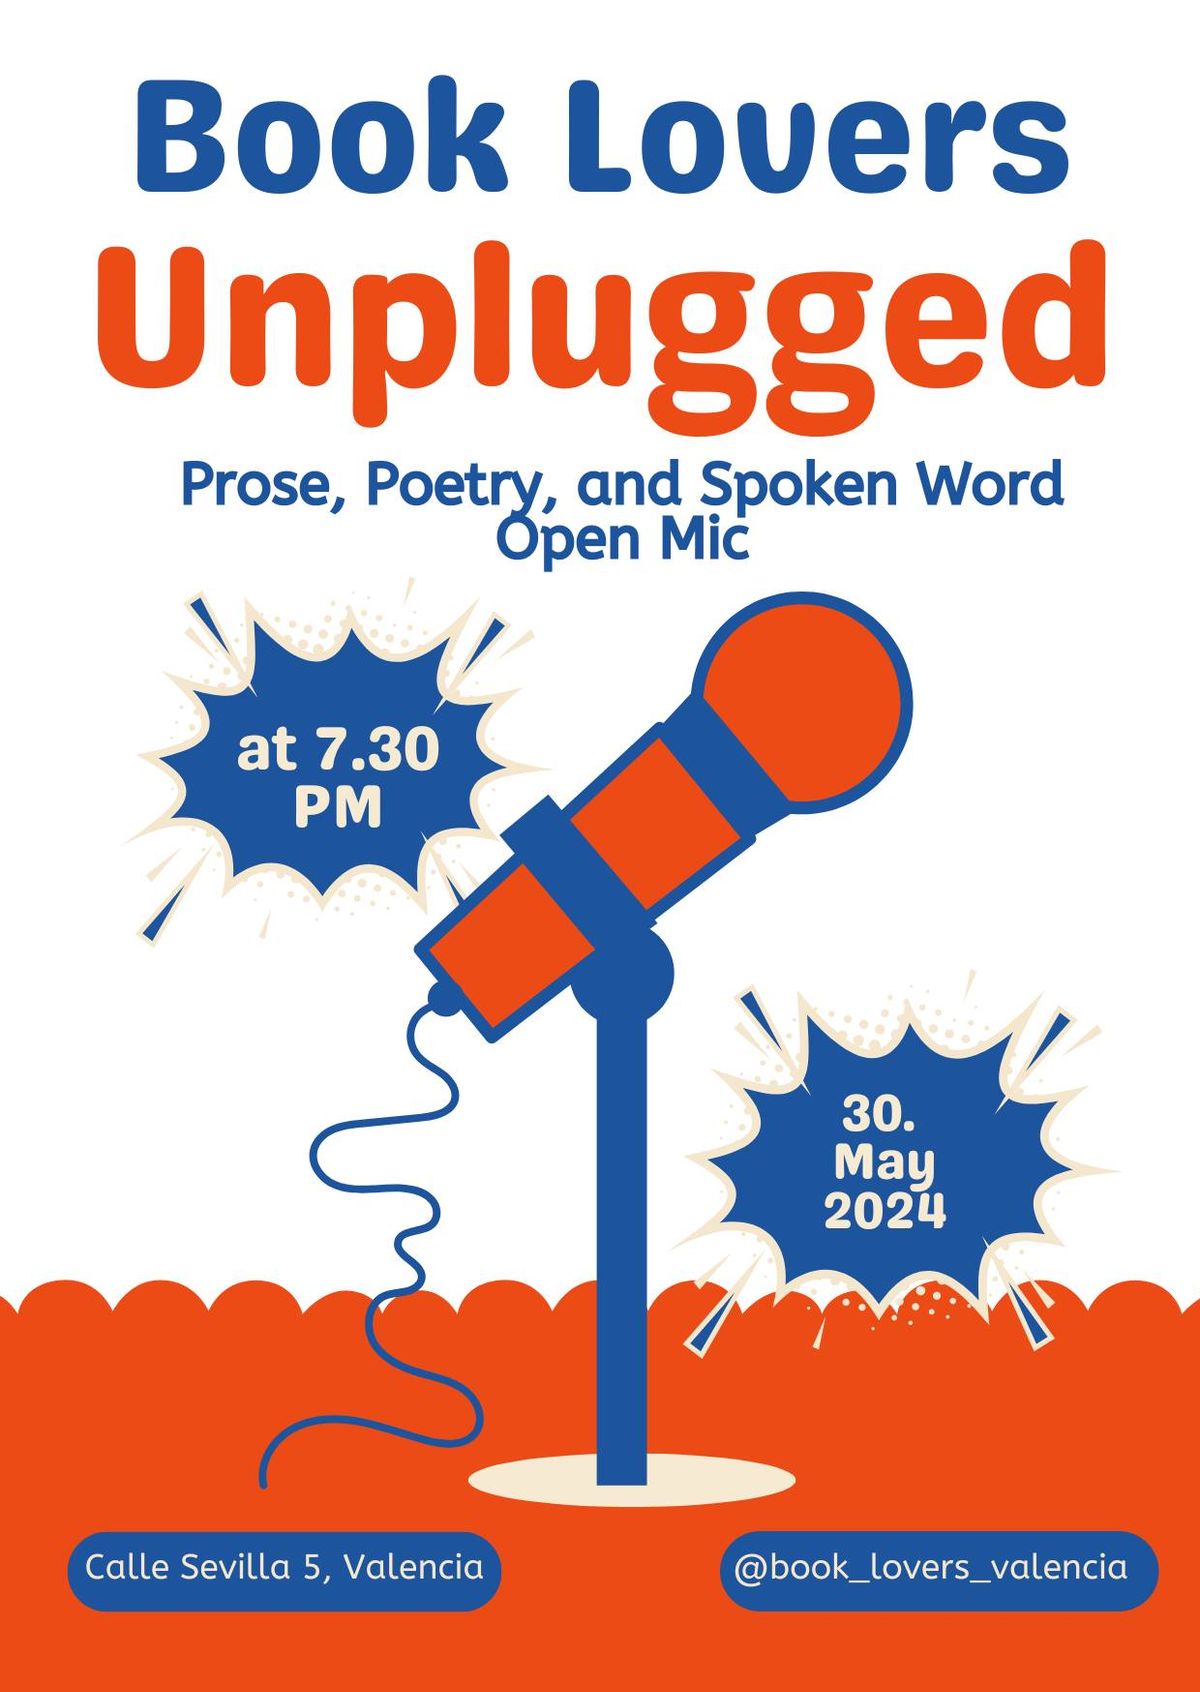 Book Lovers Unplugged - Prose, Poetry, and Spoken Word Open Mic